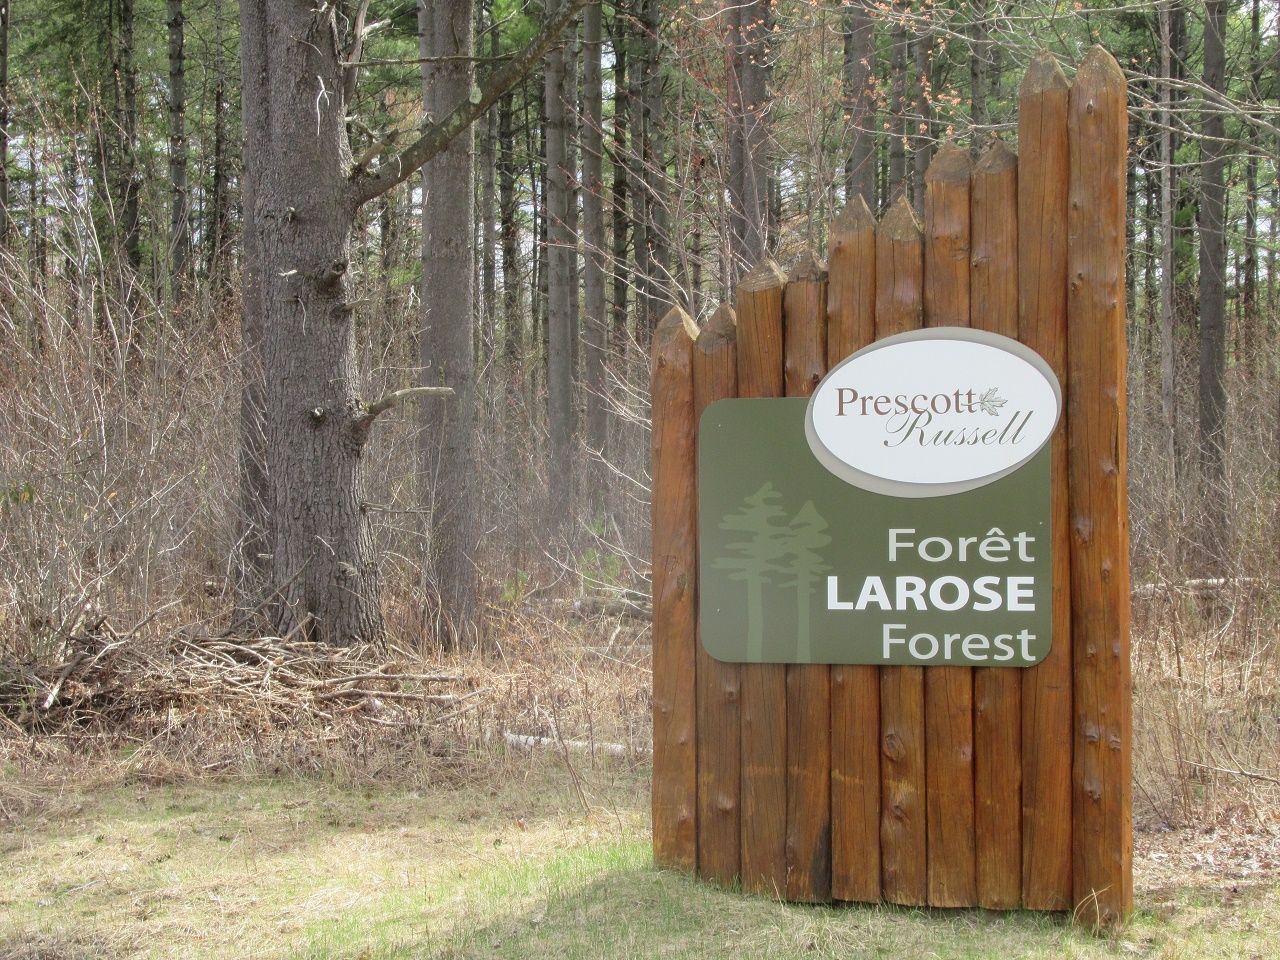 Number of trees planted in Larose Forest grows this spring